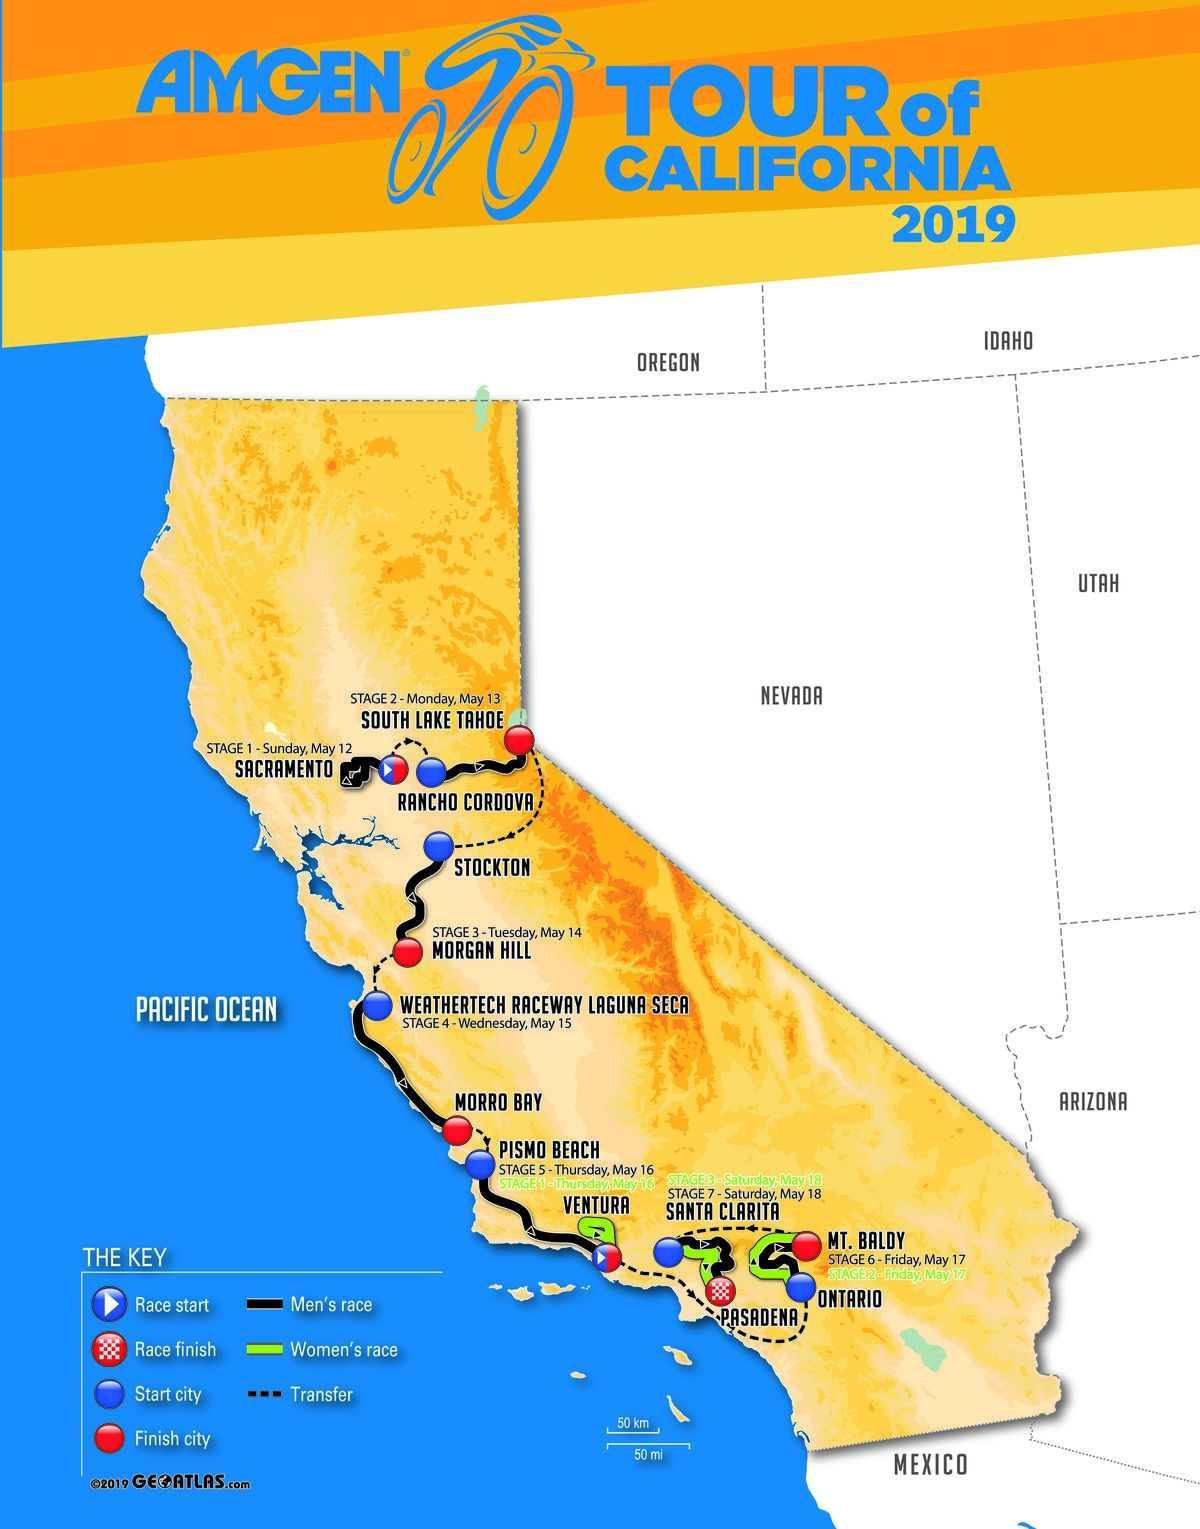 The map of California outlines the race routes for the 2019 Amgen Tour of California. 